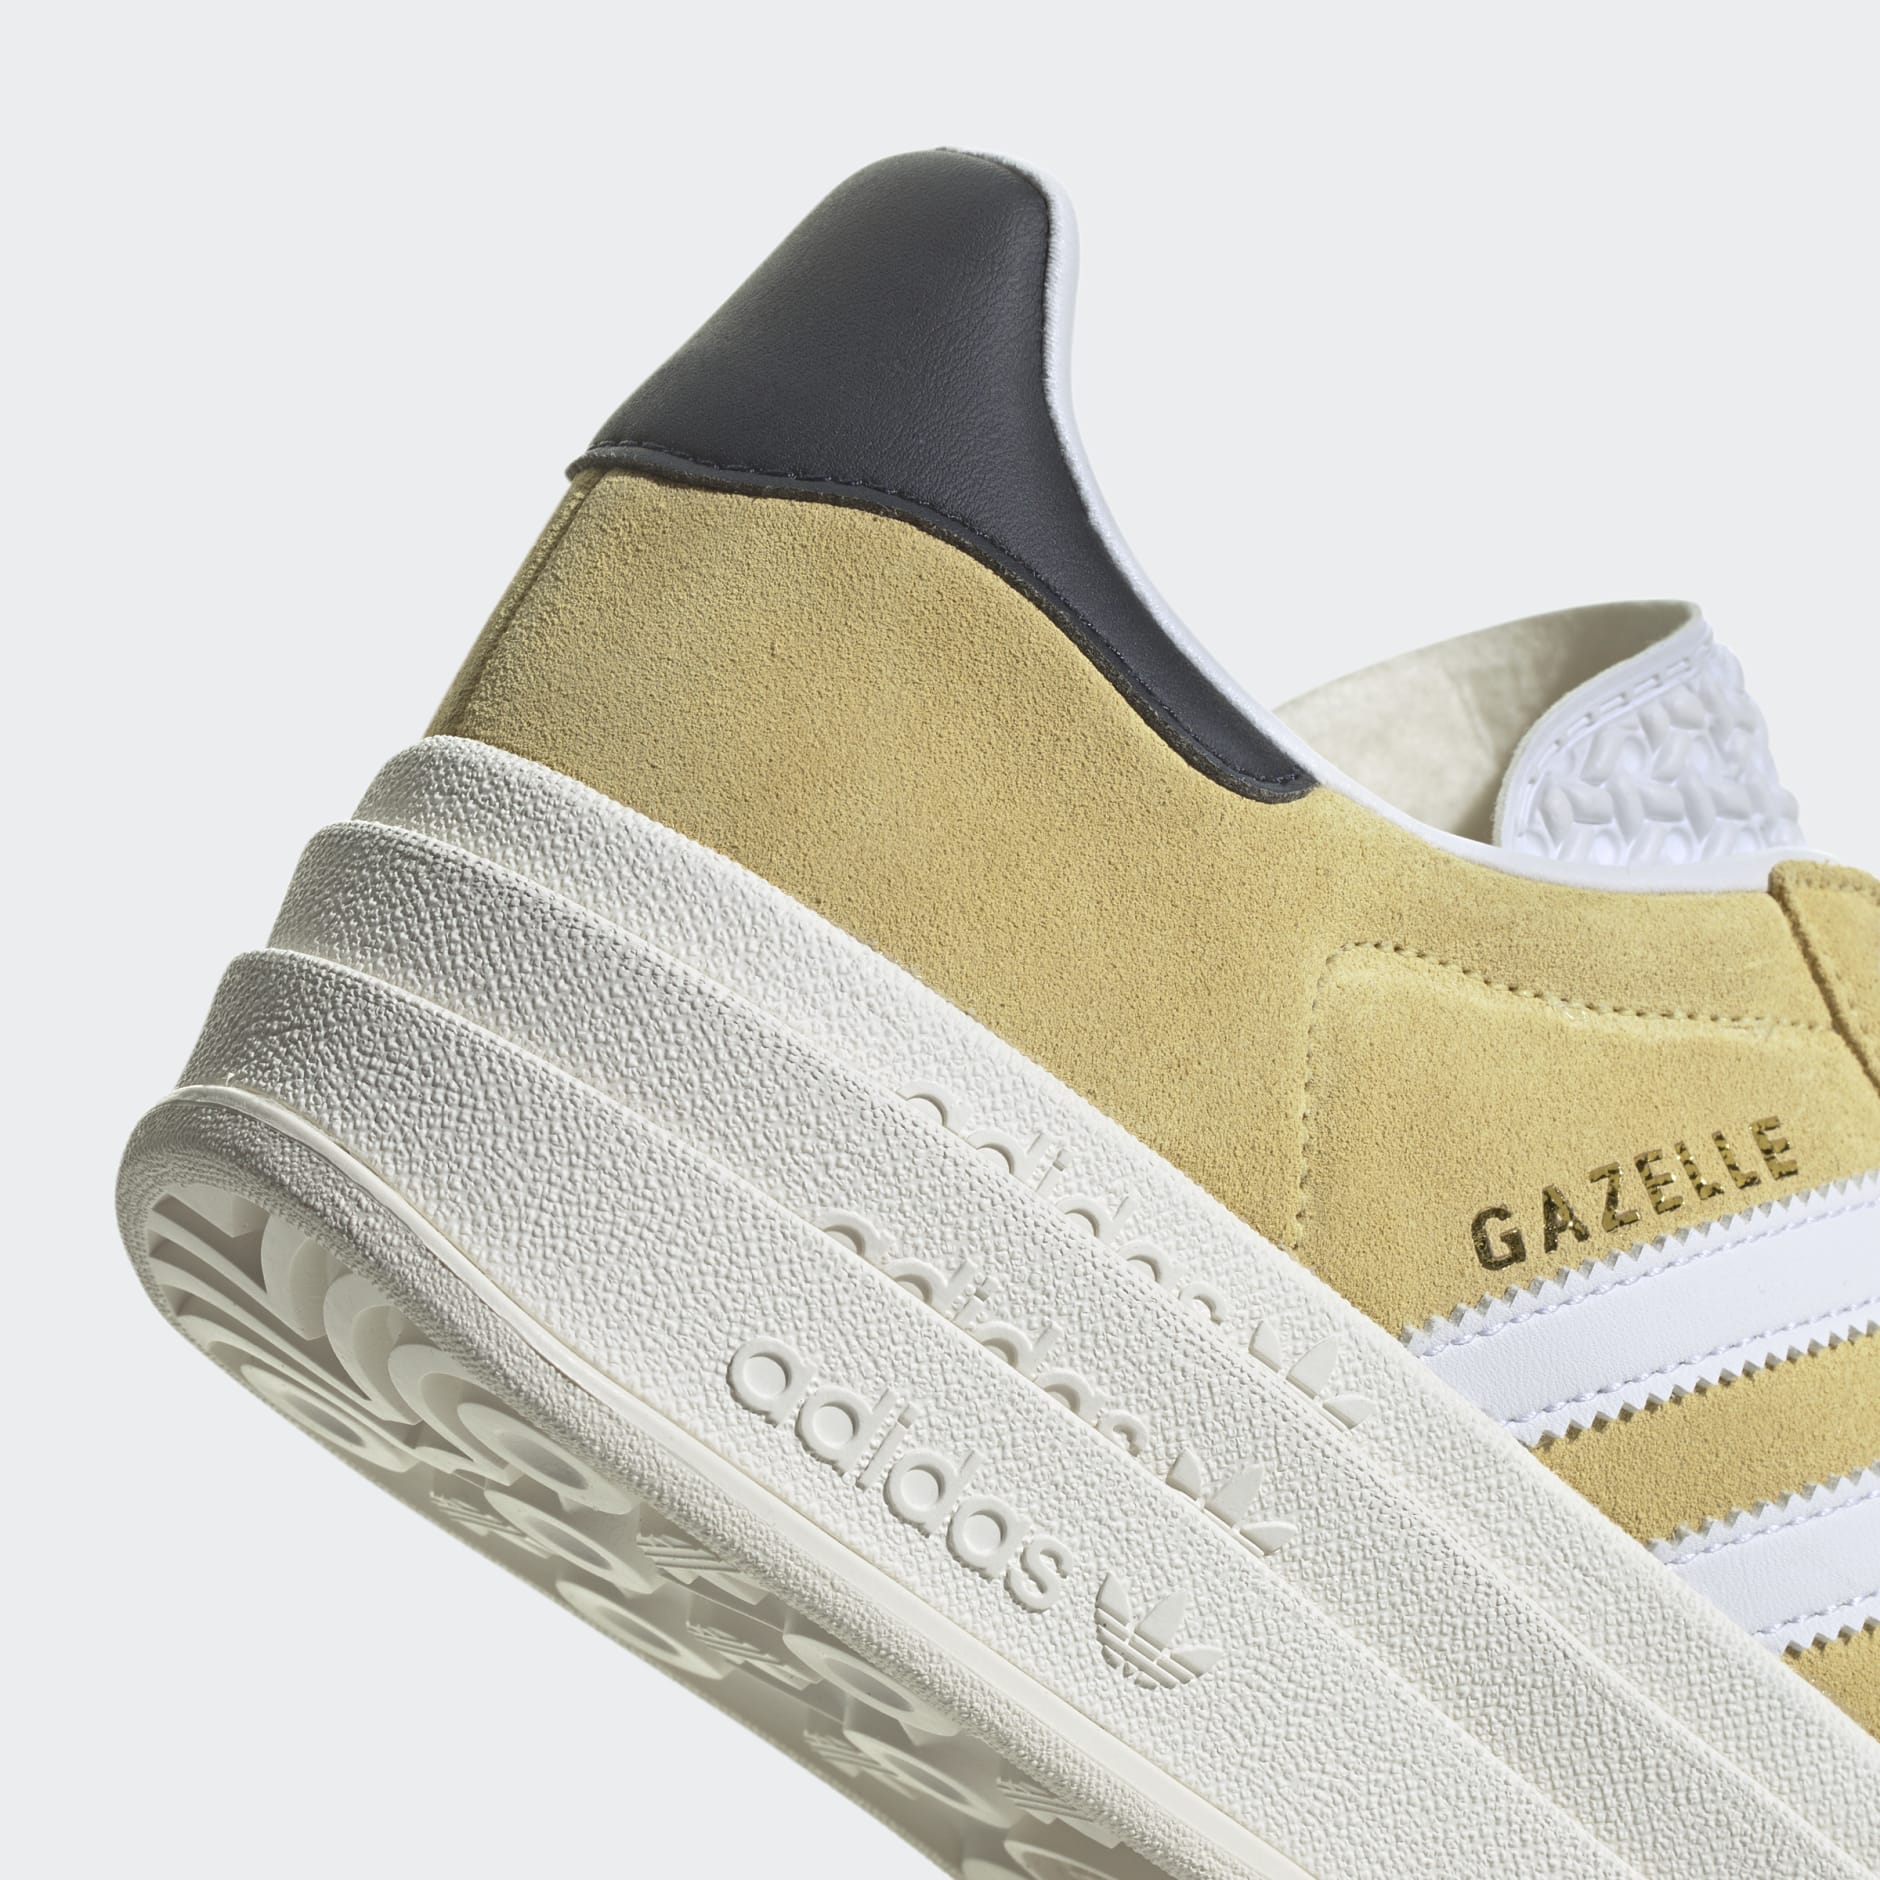 Adidas Gazelle Bold Almost Yellow / Cloud White / Legend Ink